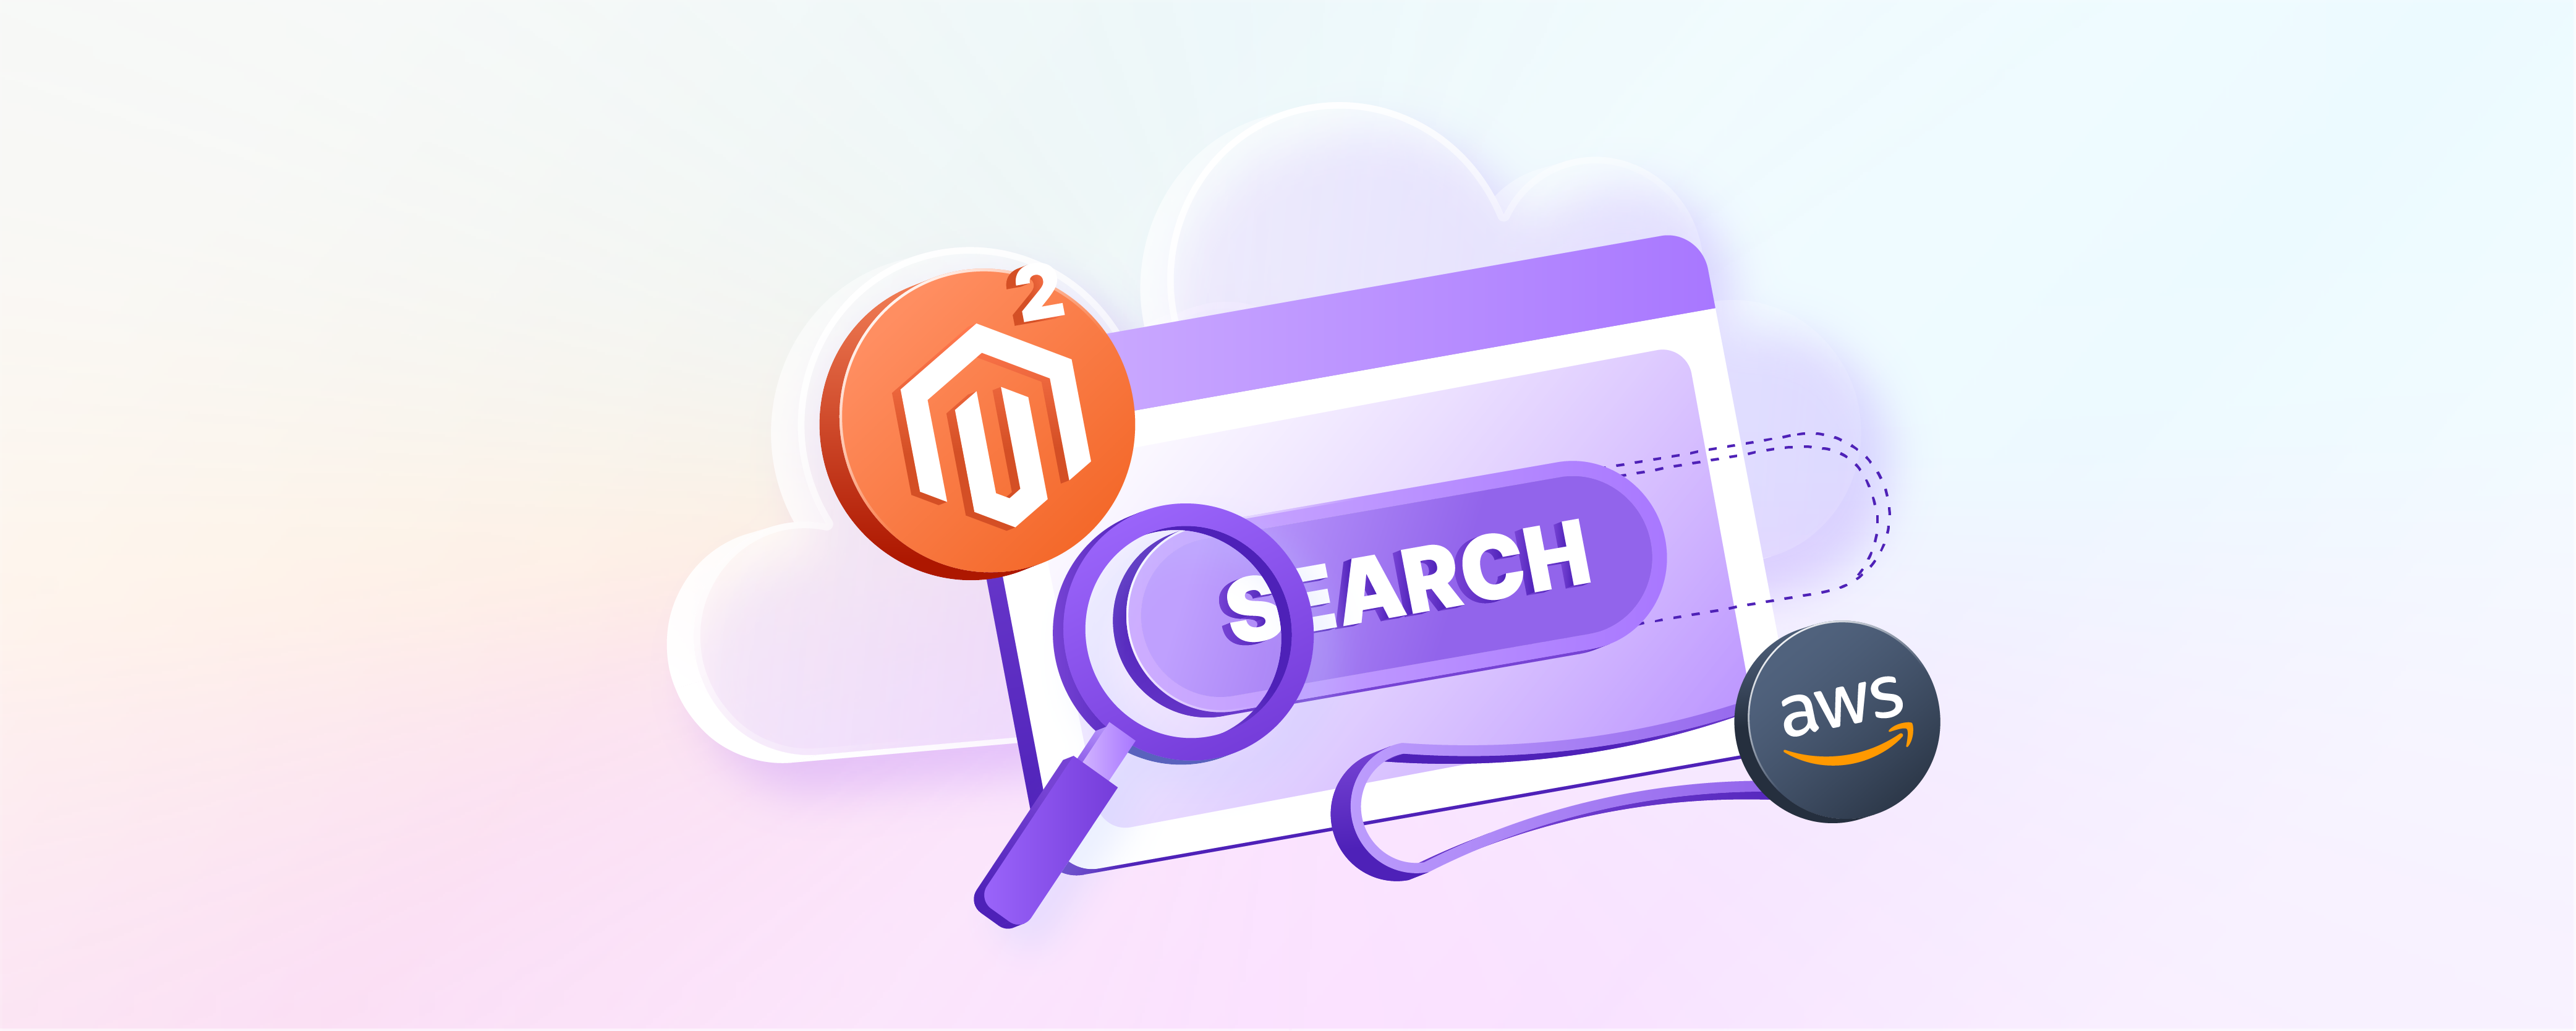 Why Use Magento 2 AWS Elasticsearch? Best Configuration Practices